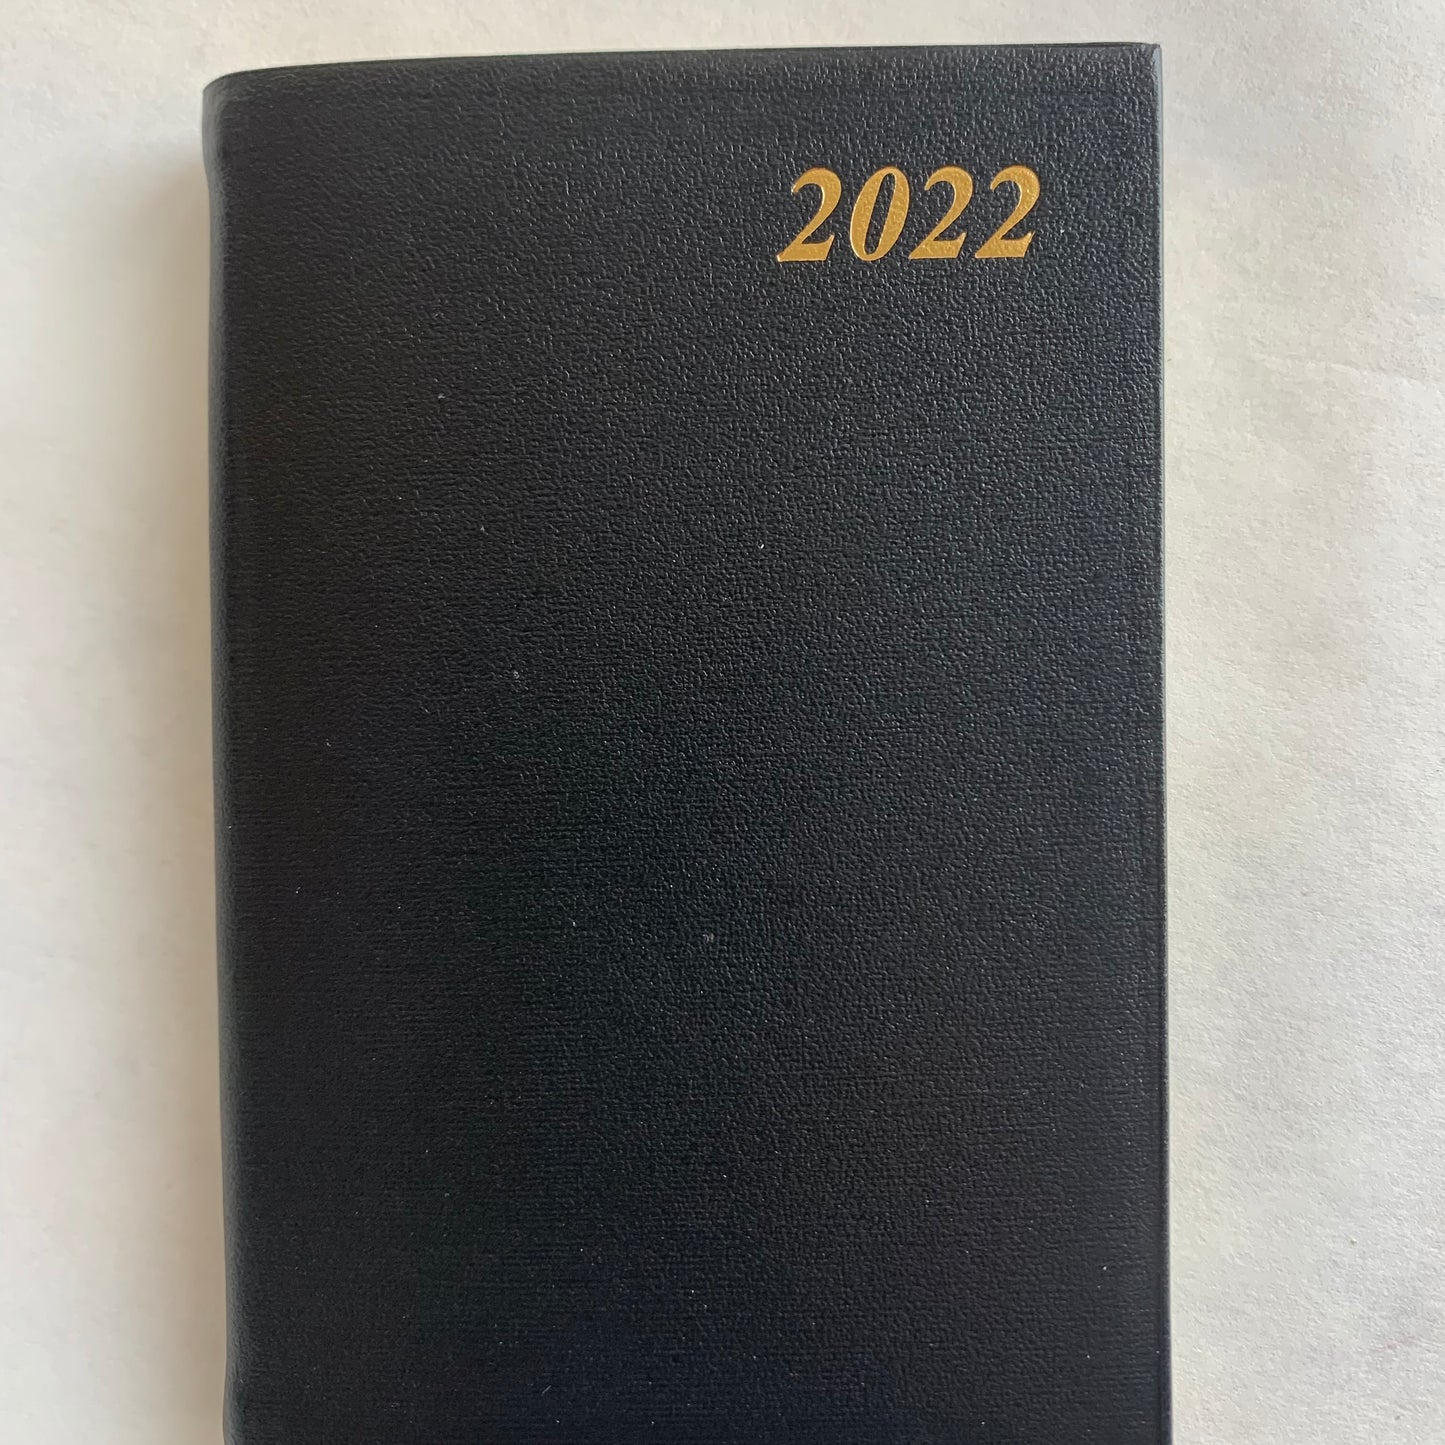 YEAR 2022 Leather Pocket Planner | 5 x 3" | BONDED LEATHER | D753BL